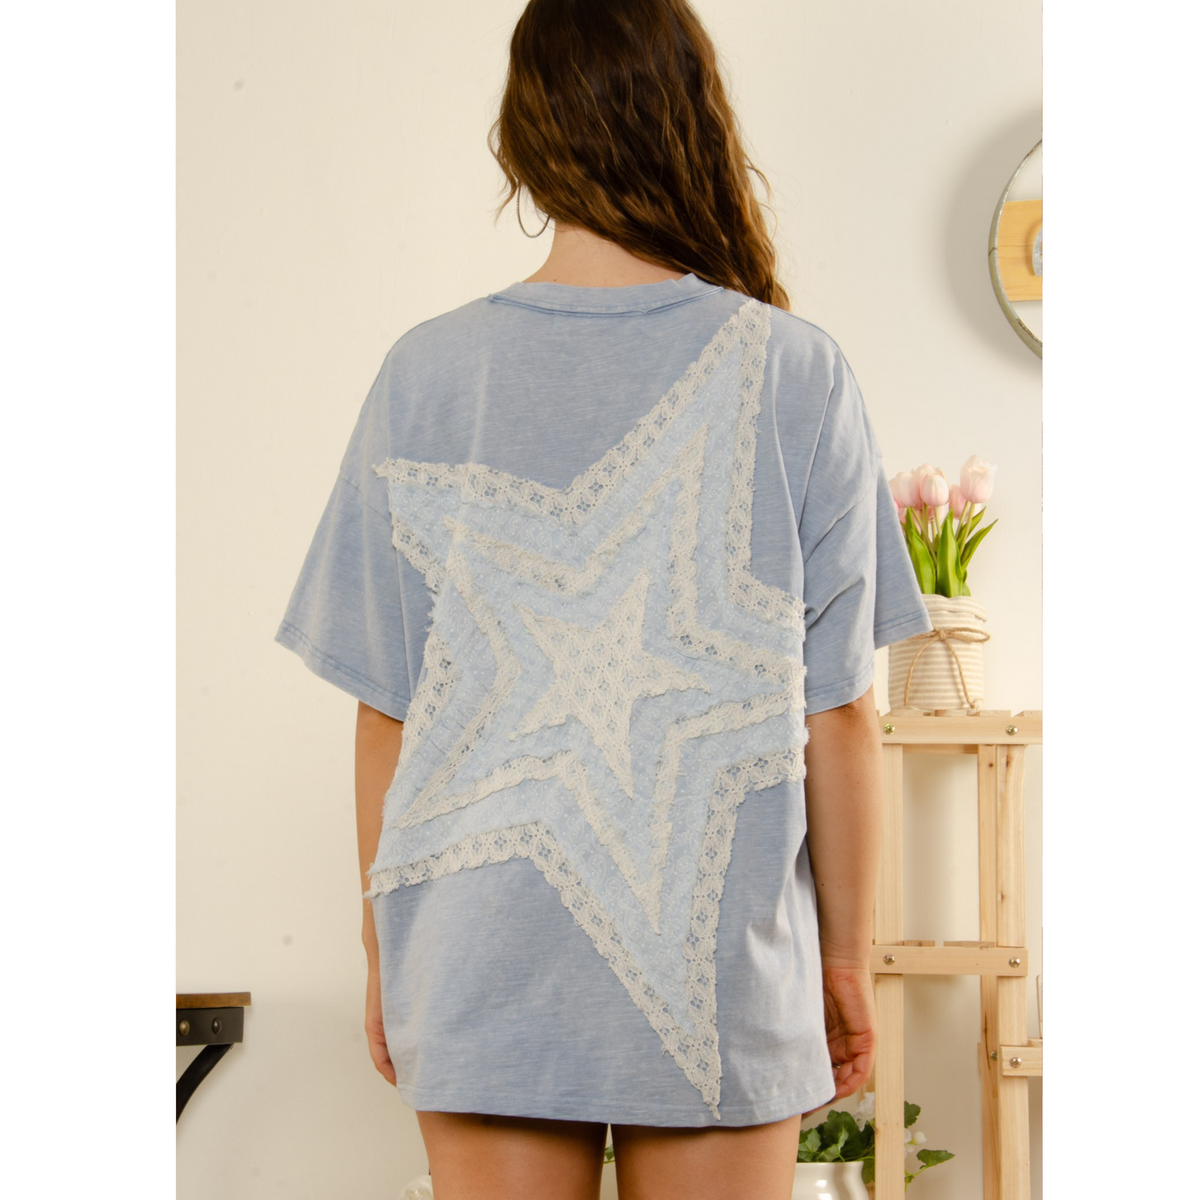 Mineral Washed Cotton Star Patch Short Sleeve Top